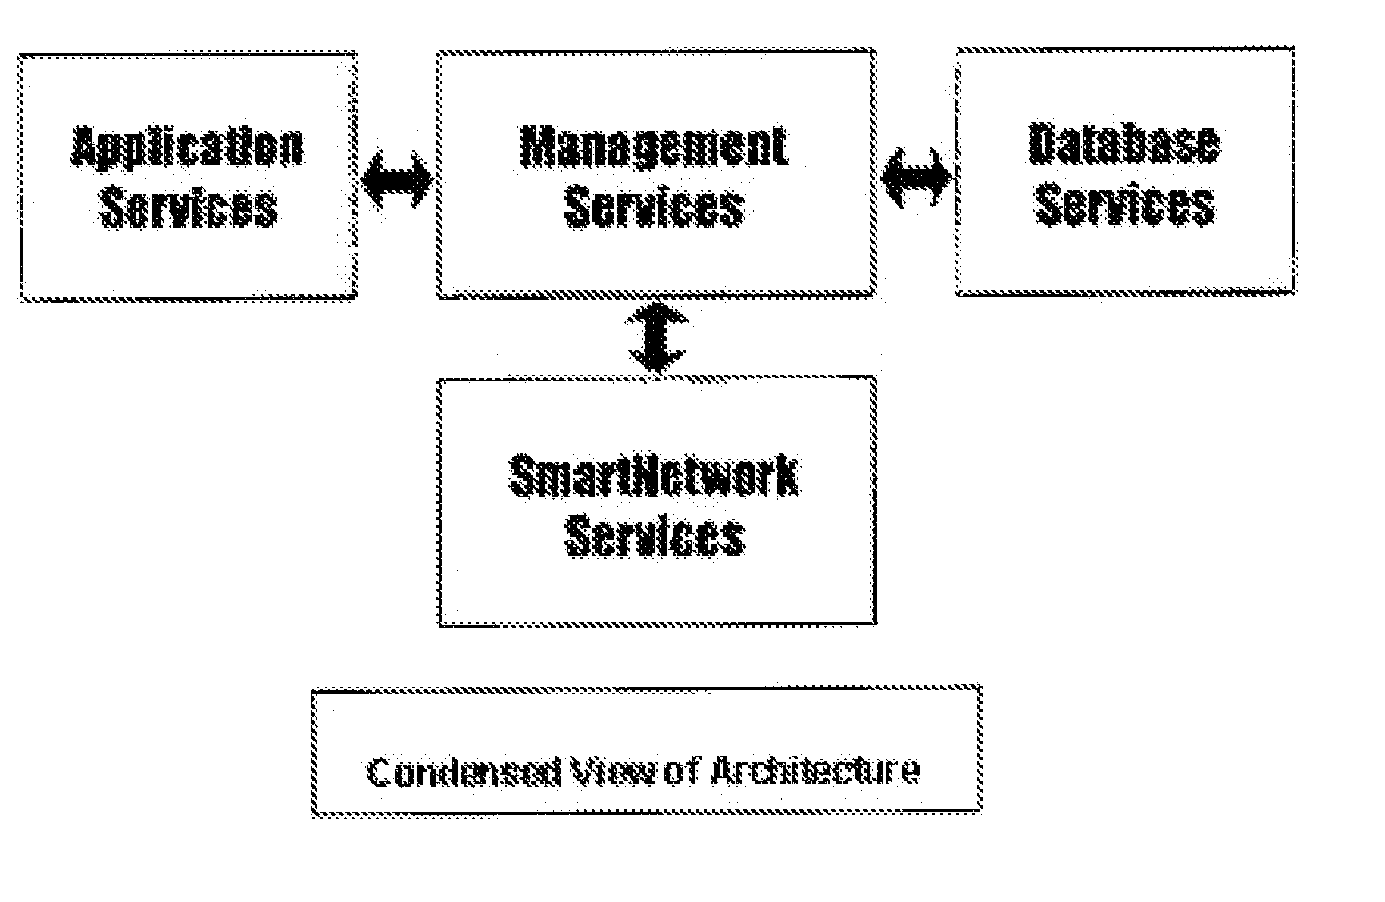 Method for smart device network application infrastructure (SDNA)